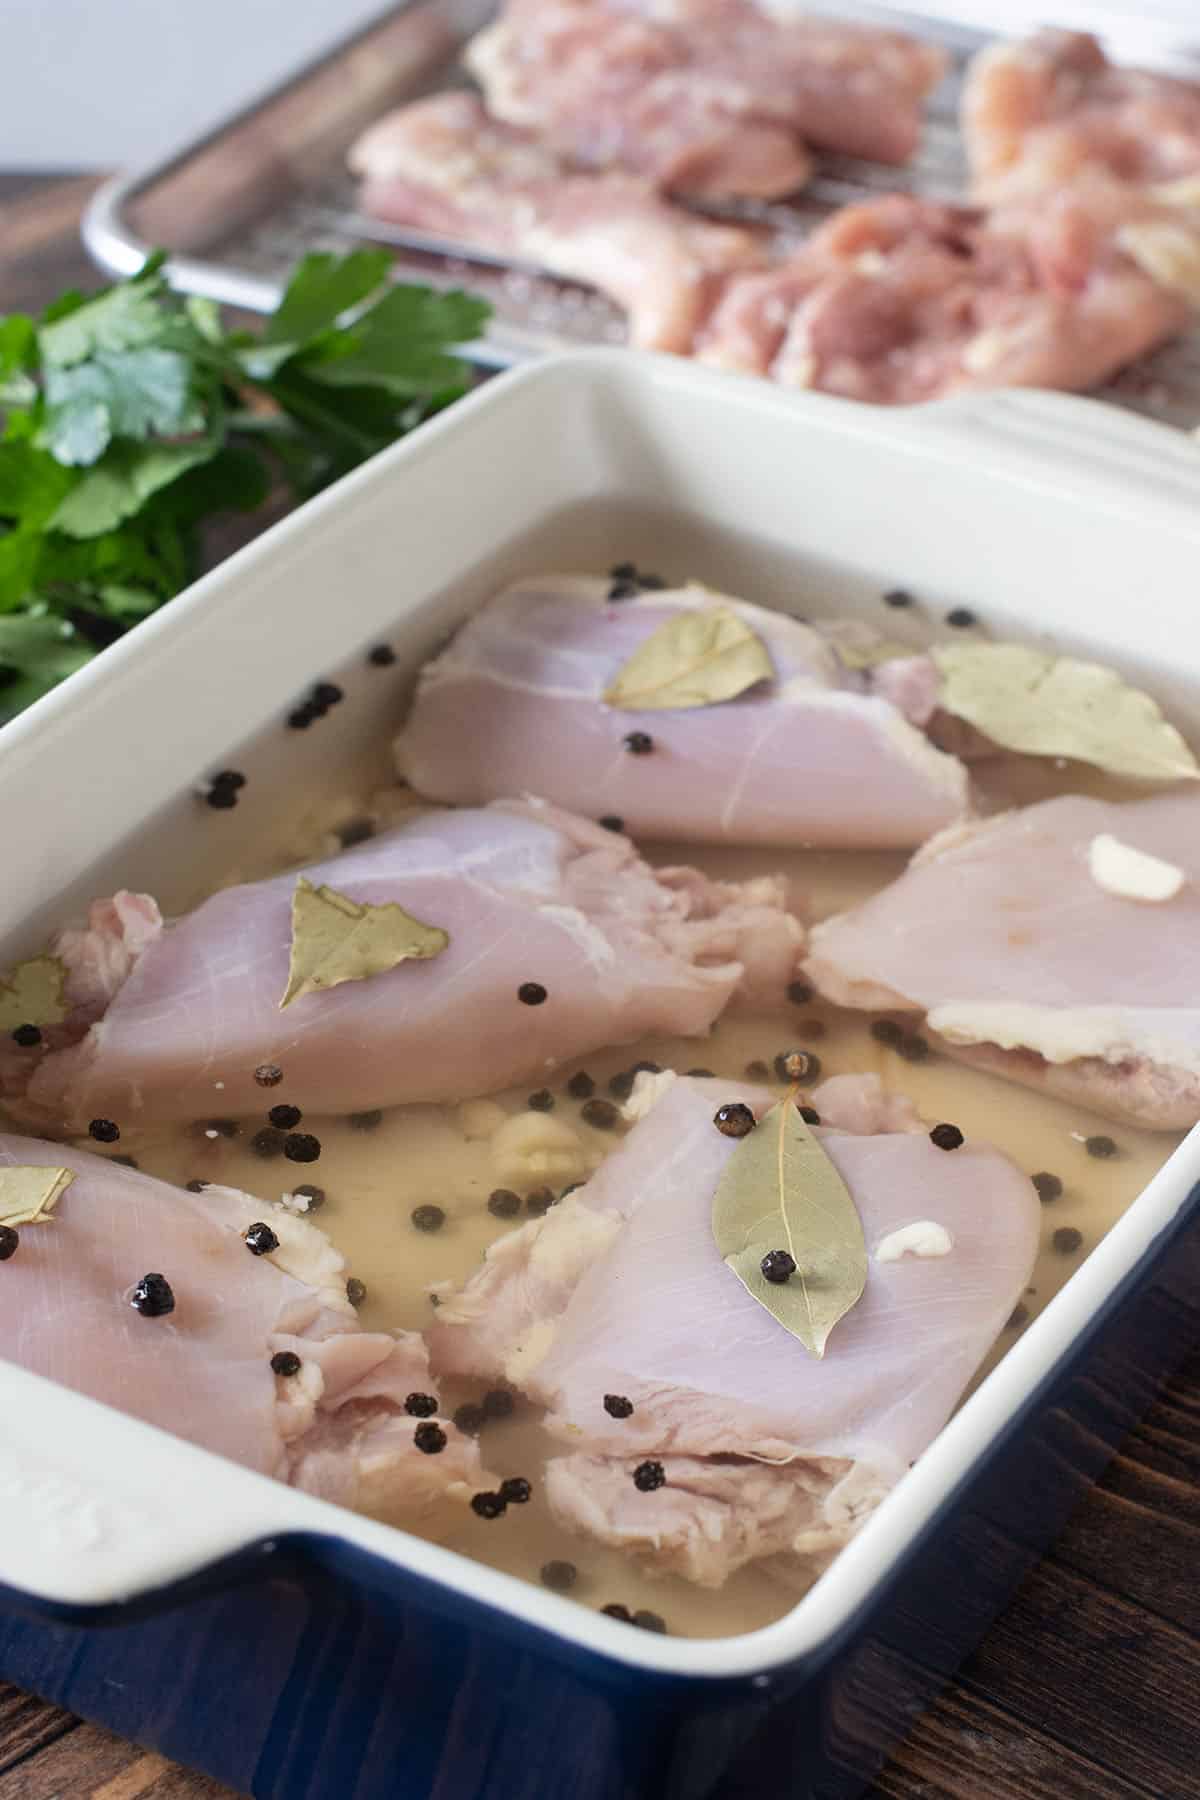 How to Brine Chicken Thighs and For How Long